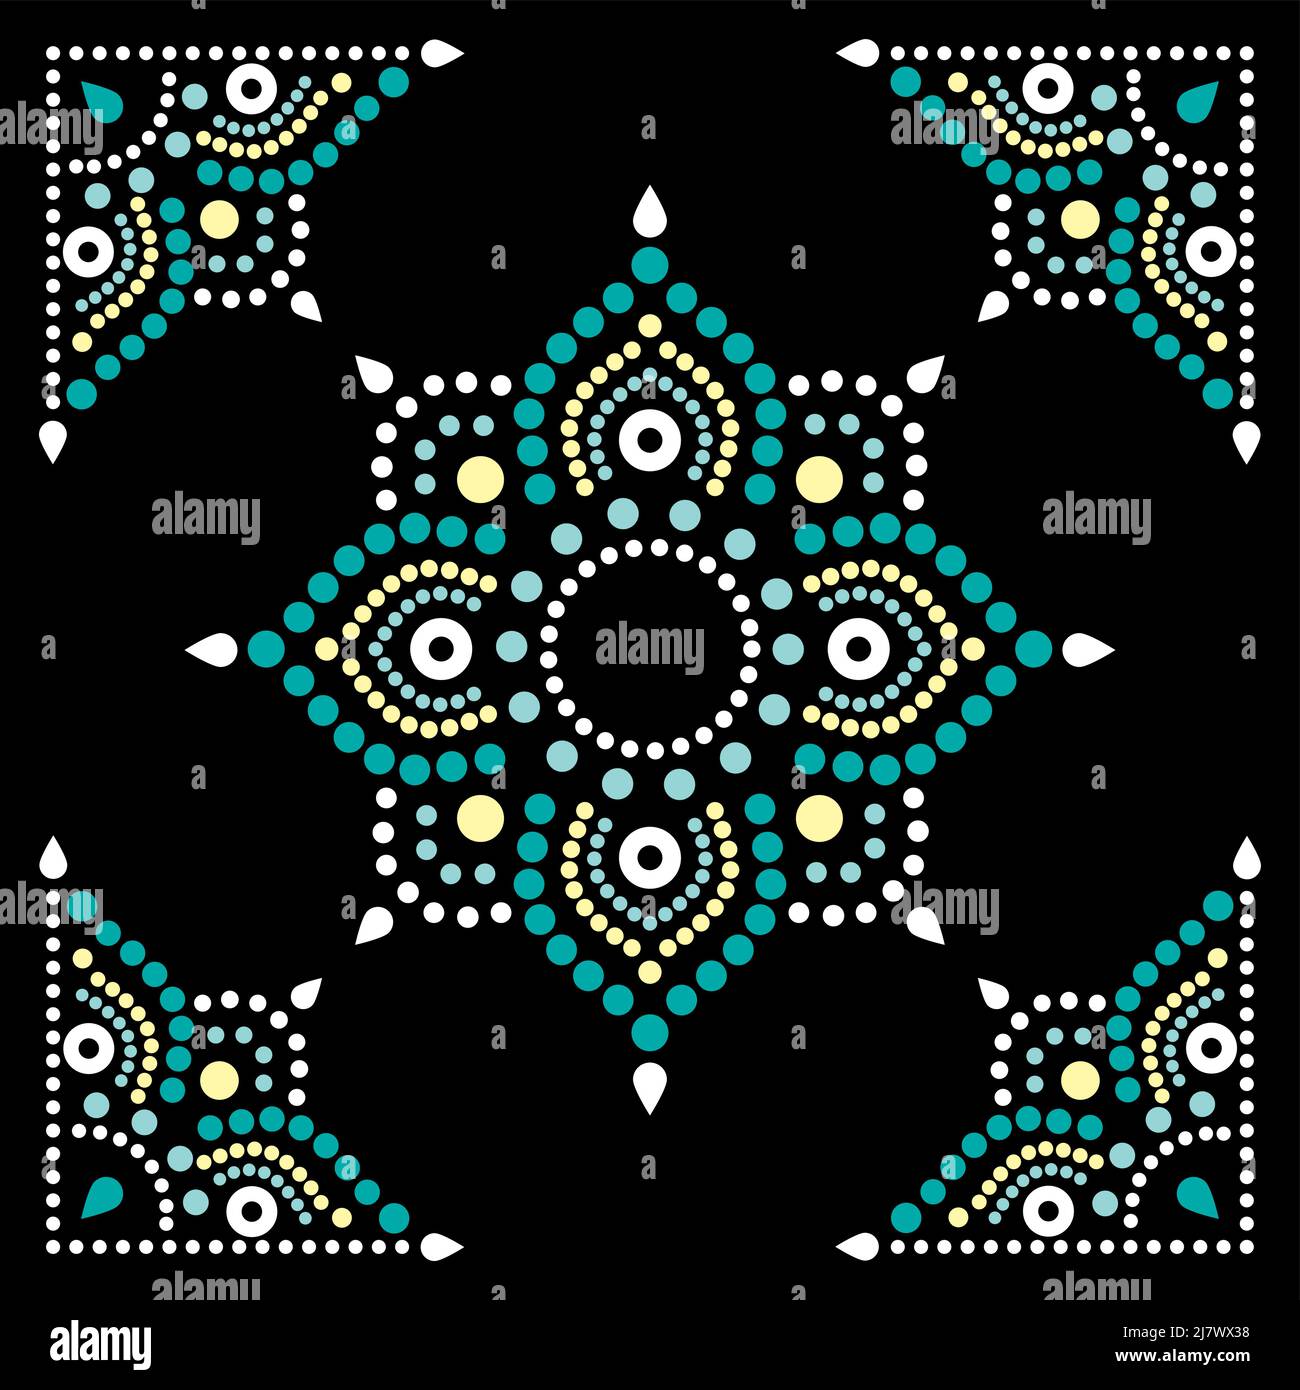 Aborignal style floral mandala with corners dot painting vector design,  Australian folk art square composition in green on black background Stock Vector